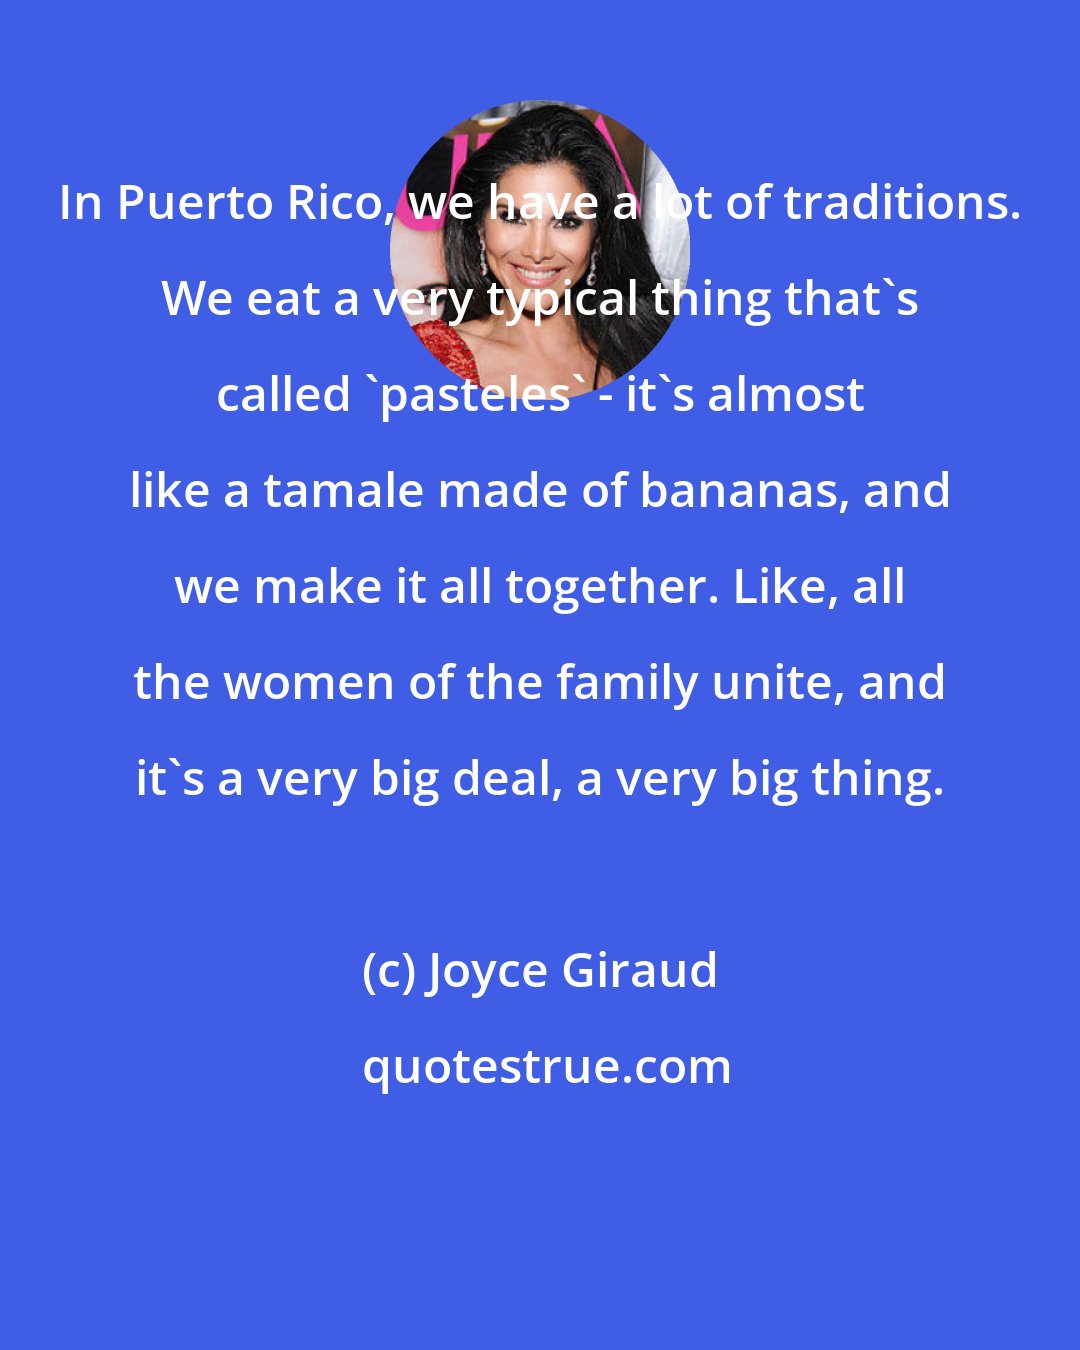 Joyce Giraud: In Puerto Rico, we have a lot of traditions. We eat a very typical thing that's called 'pasteles' - it's almost like a tamale made of bananas, and we make it all together. Like, all the women of the family unite, and it's a very big deal, a very big thing.